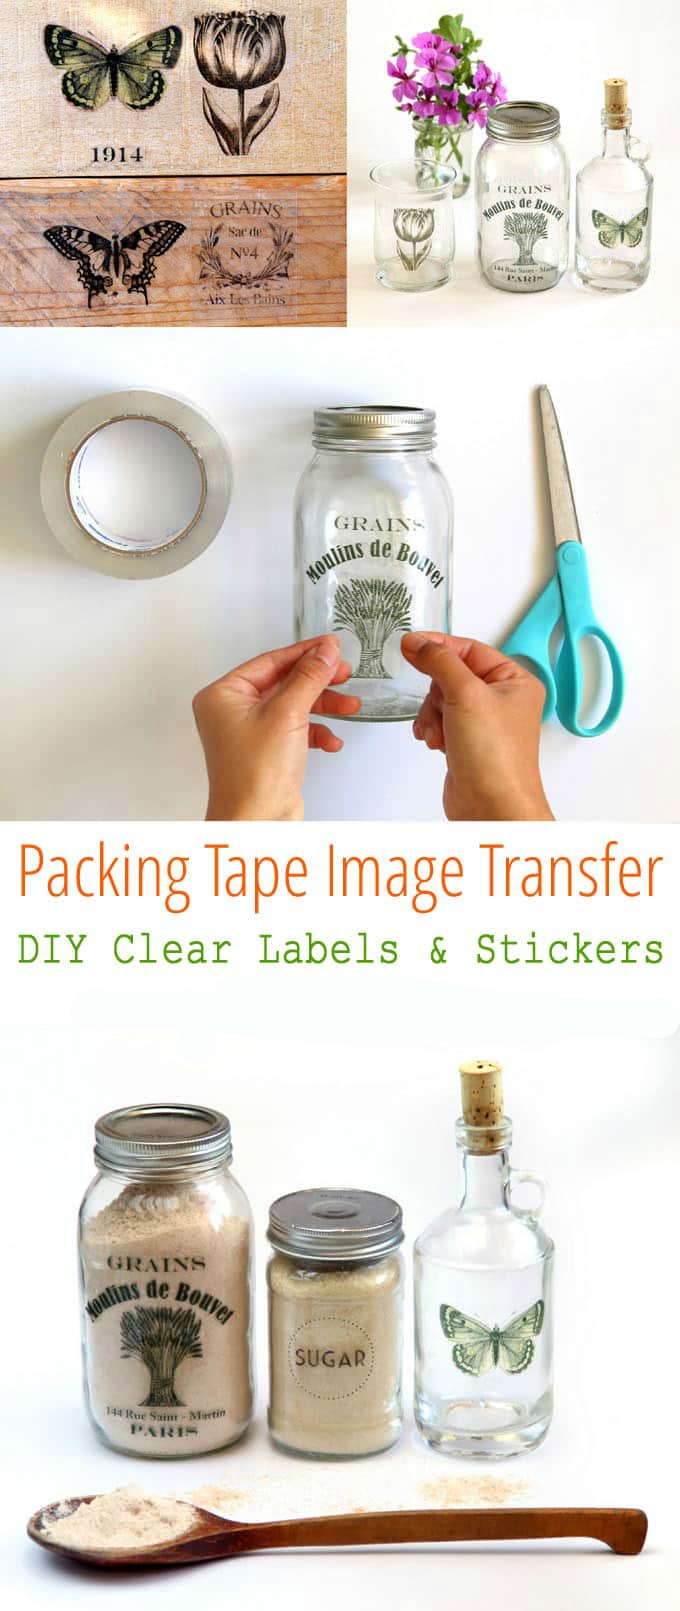 Image Transfer Using Packing Tape - DIY Clear Labels and Stickers 